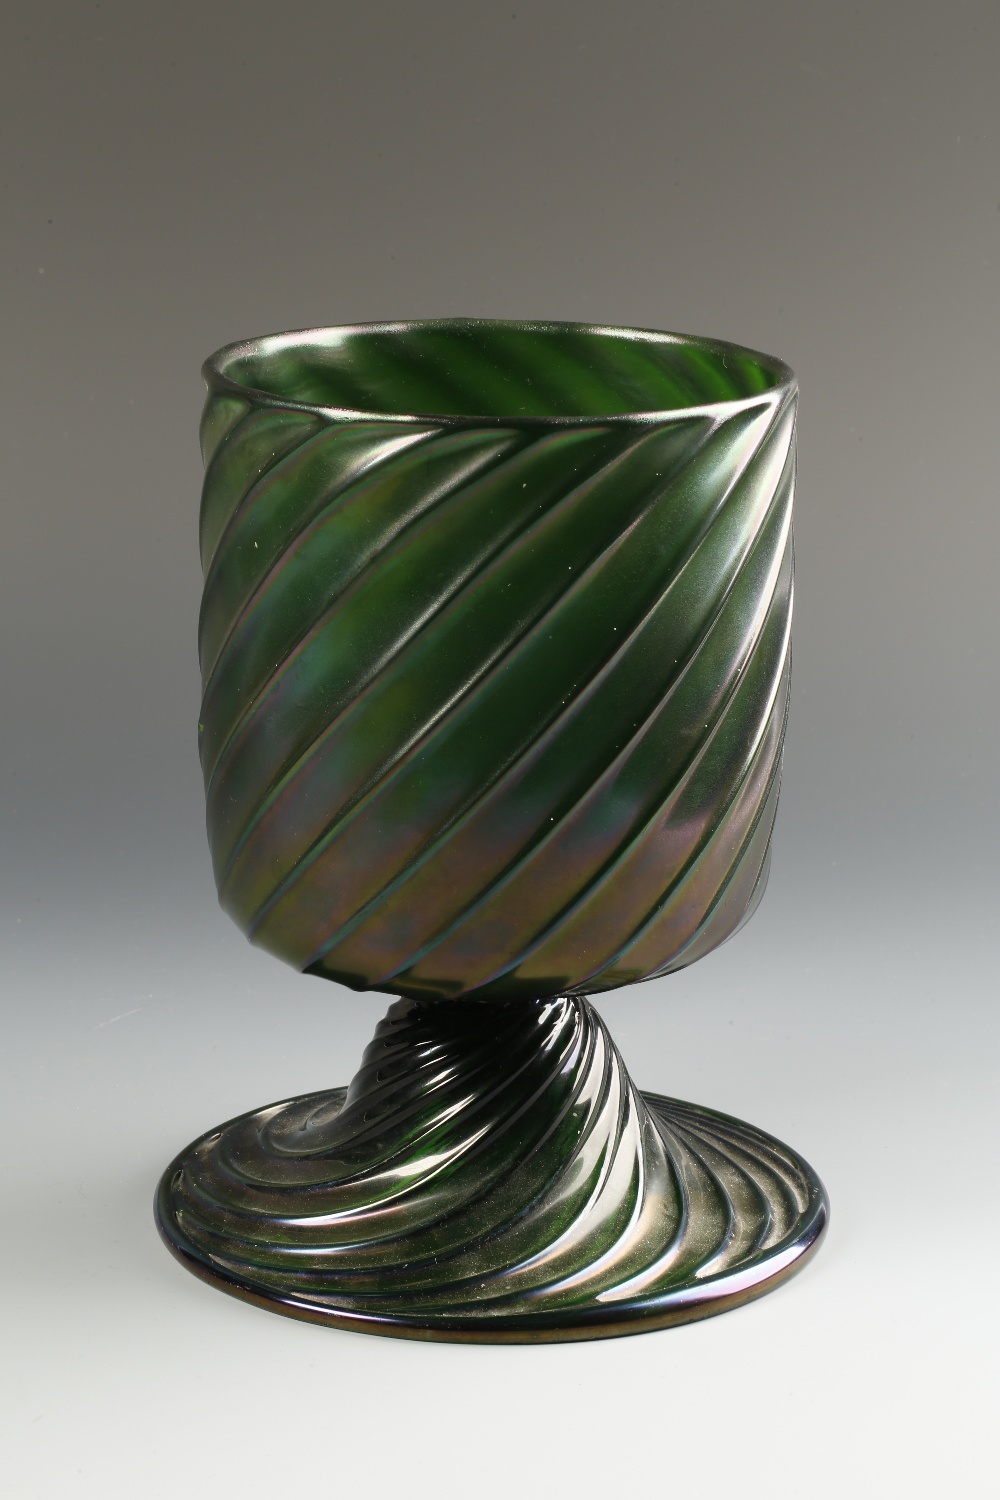 A LOETZ STYLE WRYTHEN IRIDESCENT GREEN GLASS VASE with a straight-sided bowl on a broad spreading